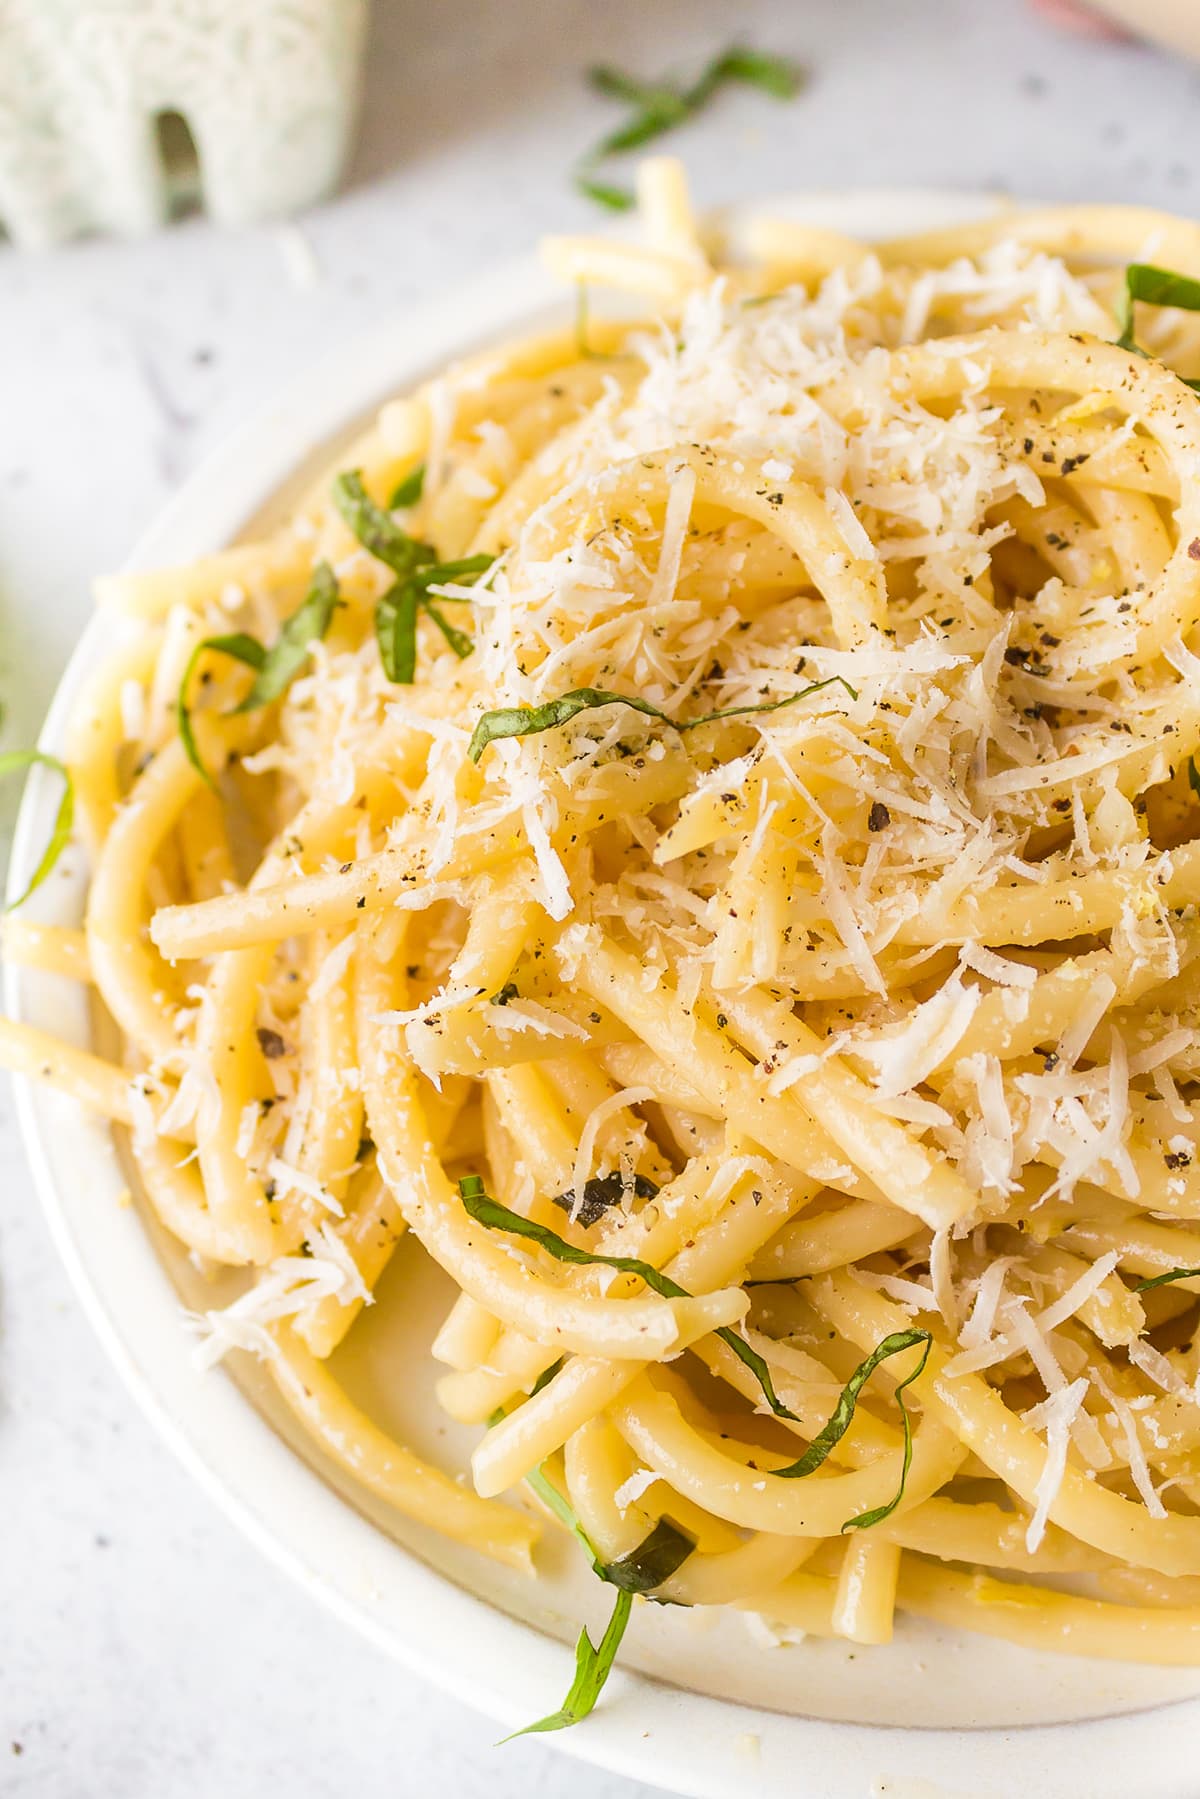 lemon garlic pasta served on plate with parmesan cheese